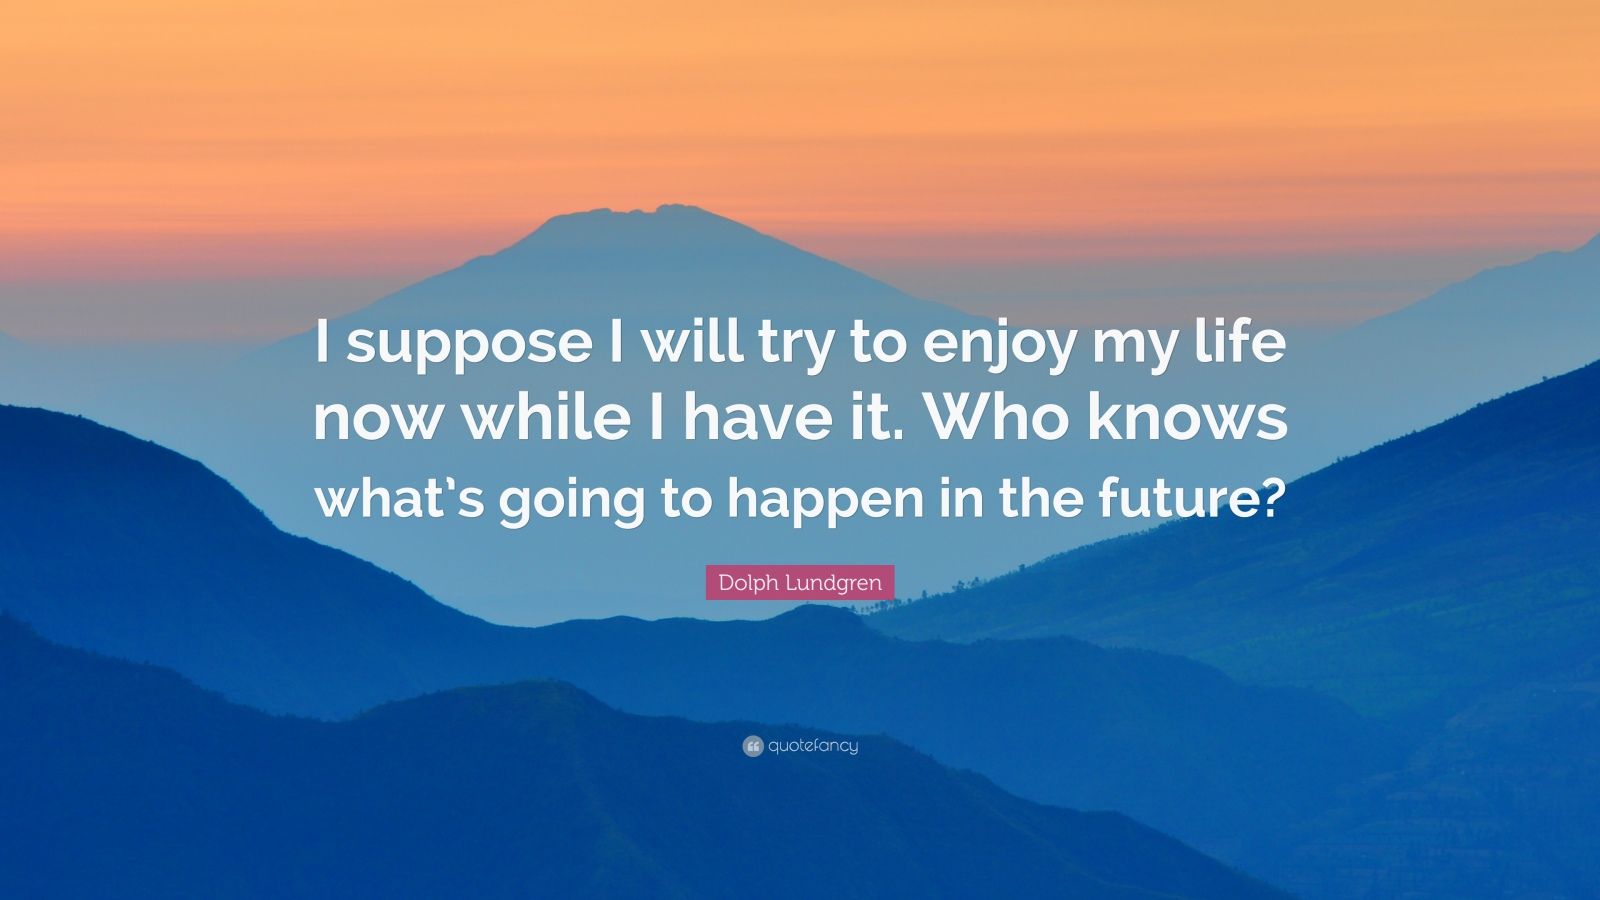 Dolph Lundgren Quote: “I suppose I will try to enjoy my life now while ...